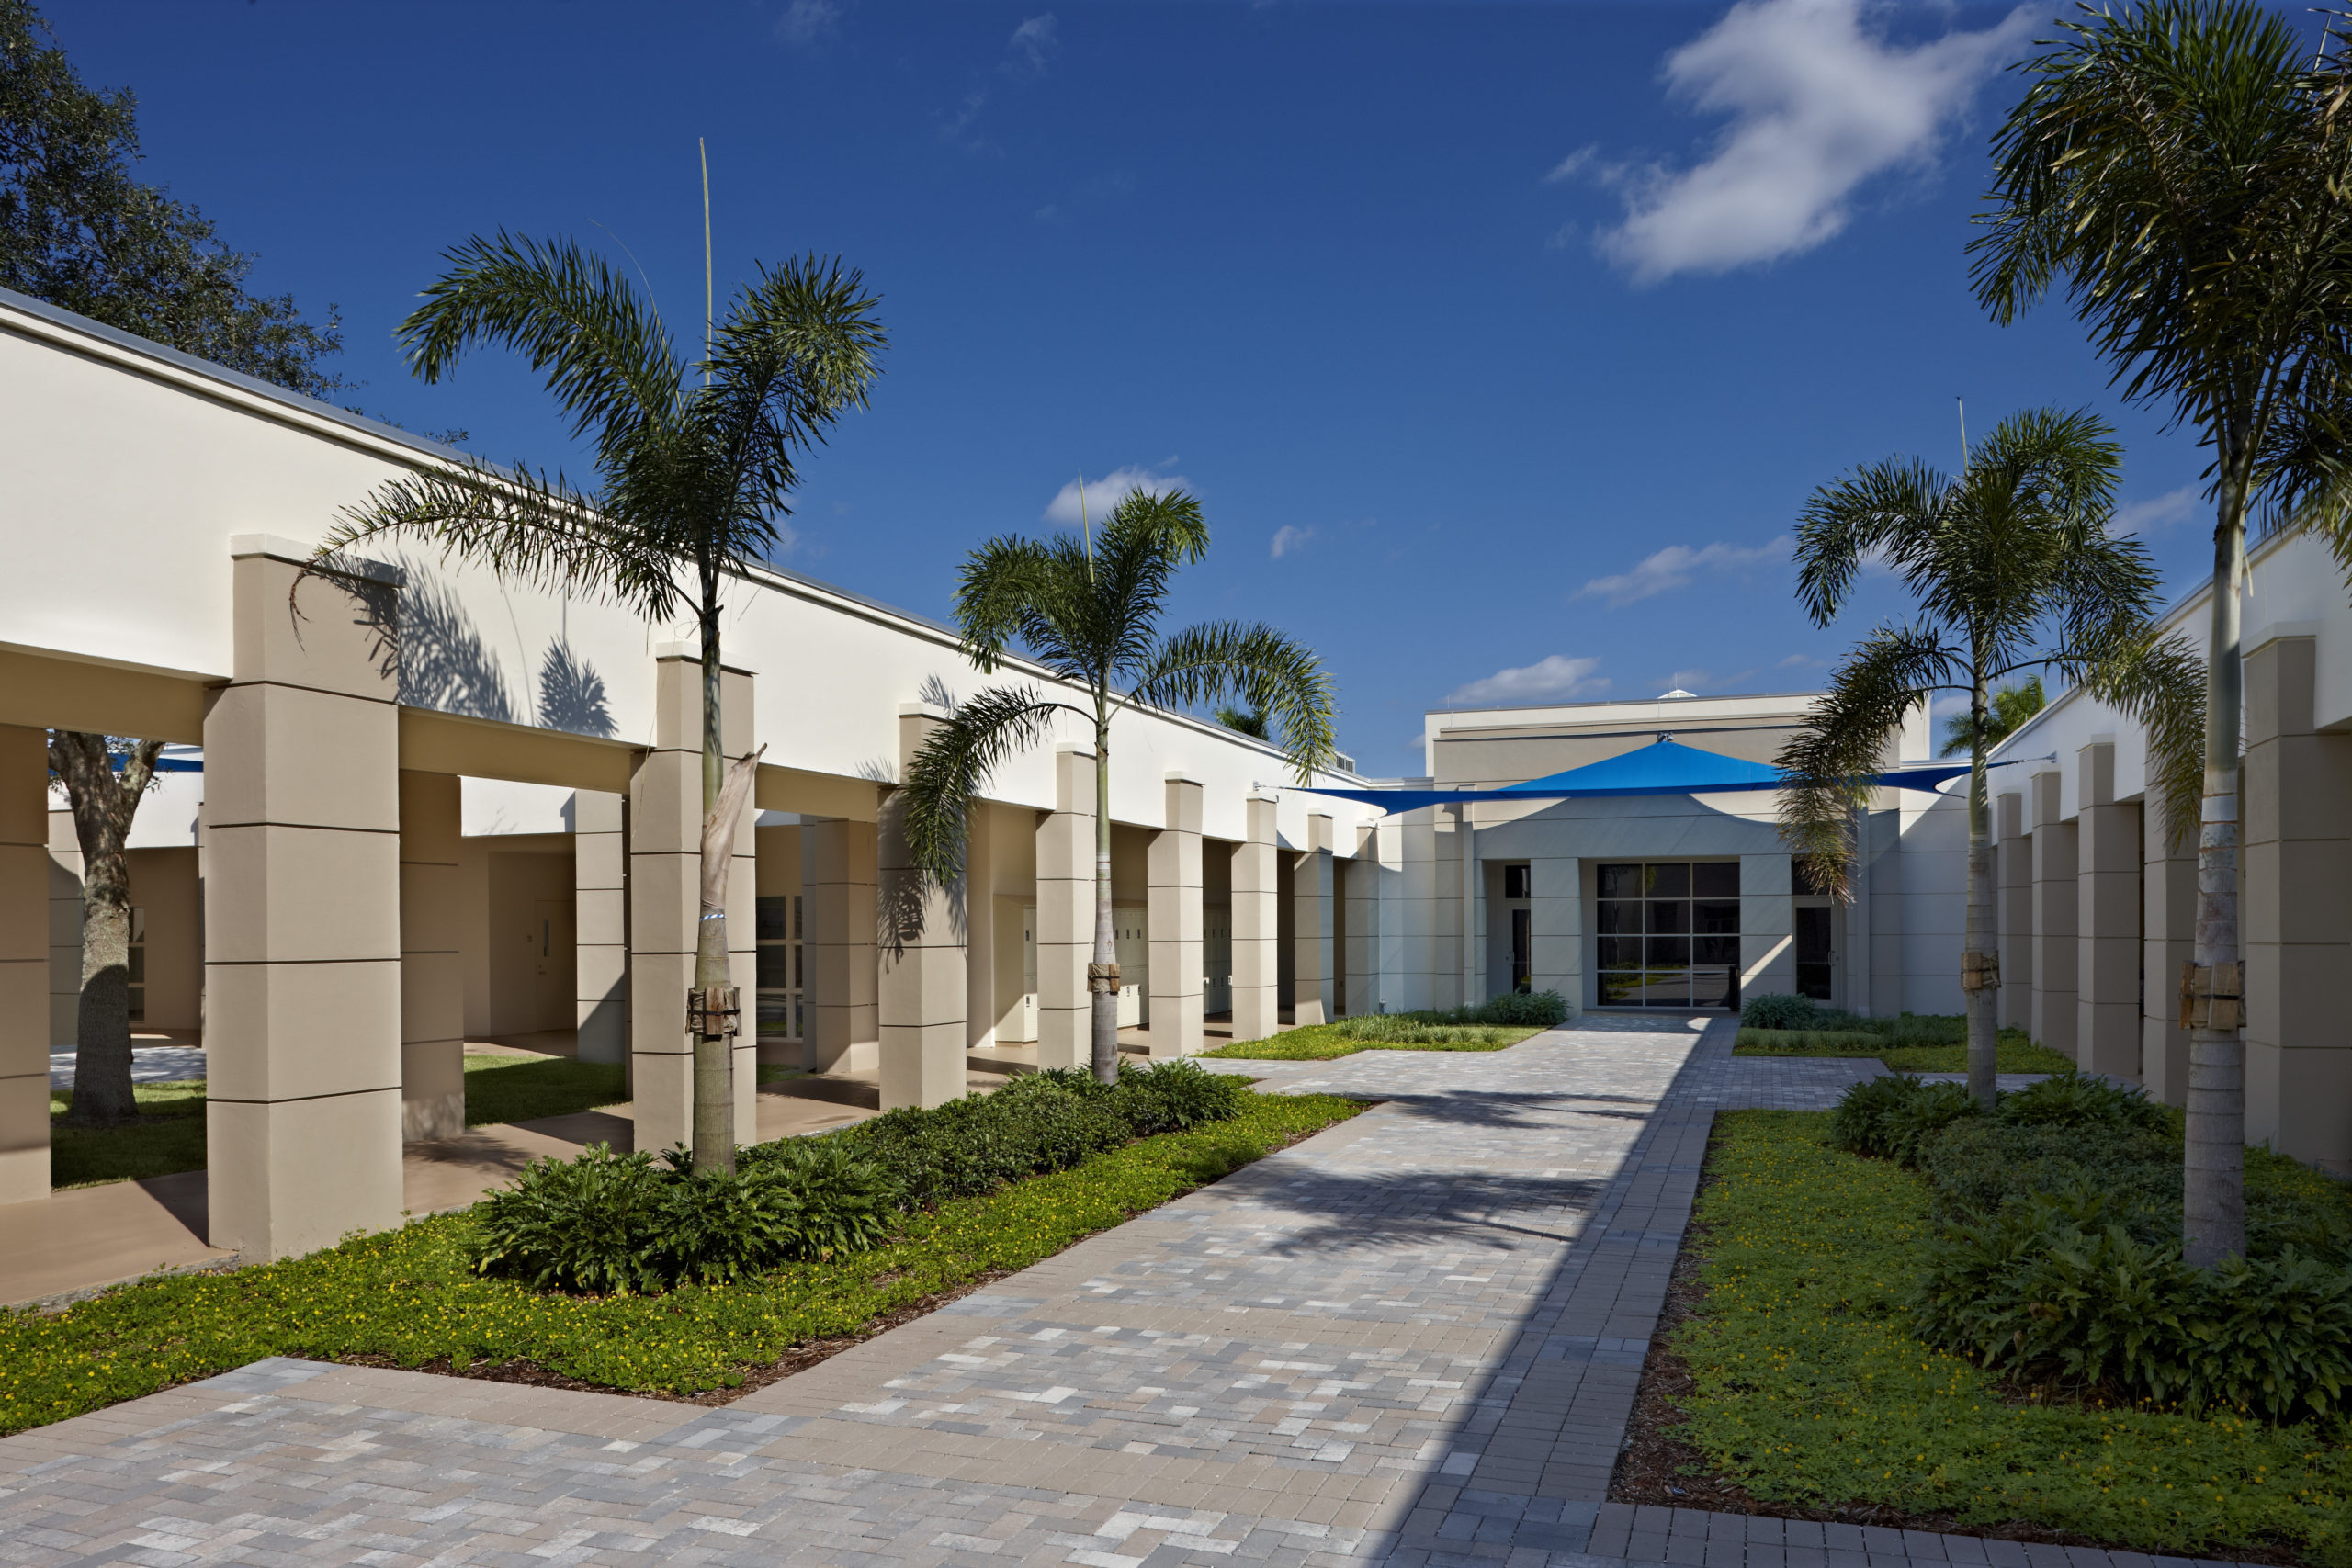 OXBRIDGE ACADEMY OF THE PALM BEACHES Hedrick Brothers Construction